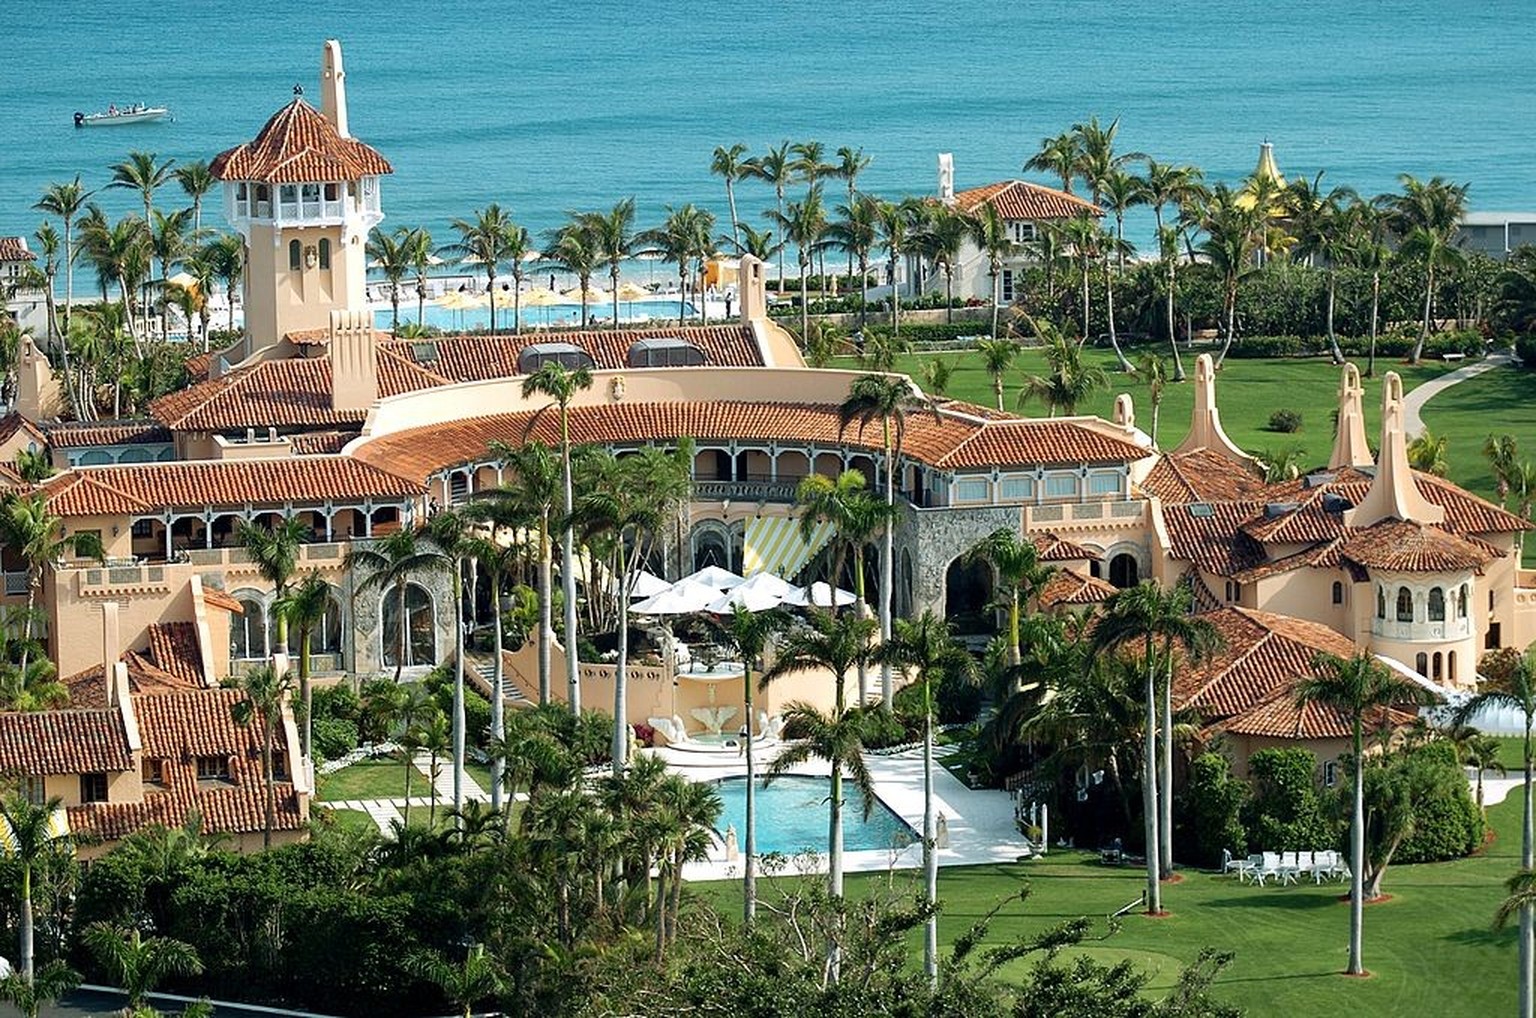 UNITED STATES - JANUARY 22: Aerial view of Mar-a-Lago, the oceanfront estate of billionaire Donald Trump in Palm Beach, Fla. Trump and Slovenian model Melania Knauss will hold their reception at the m ...